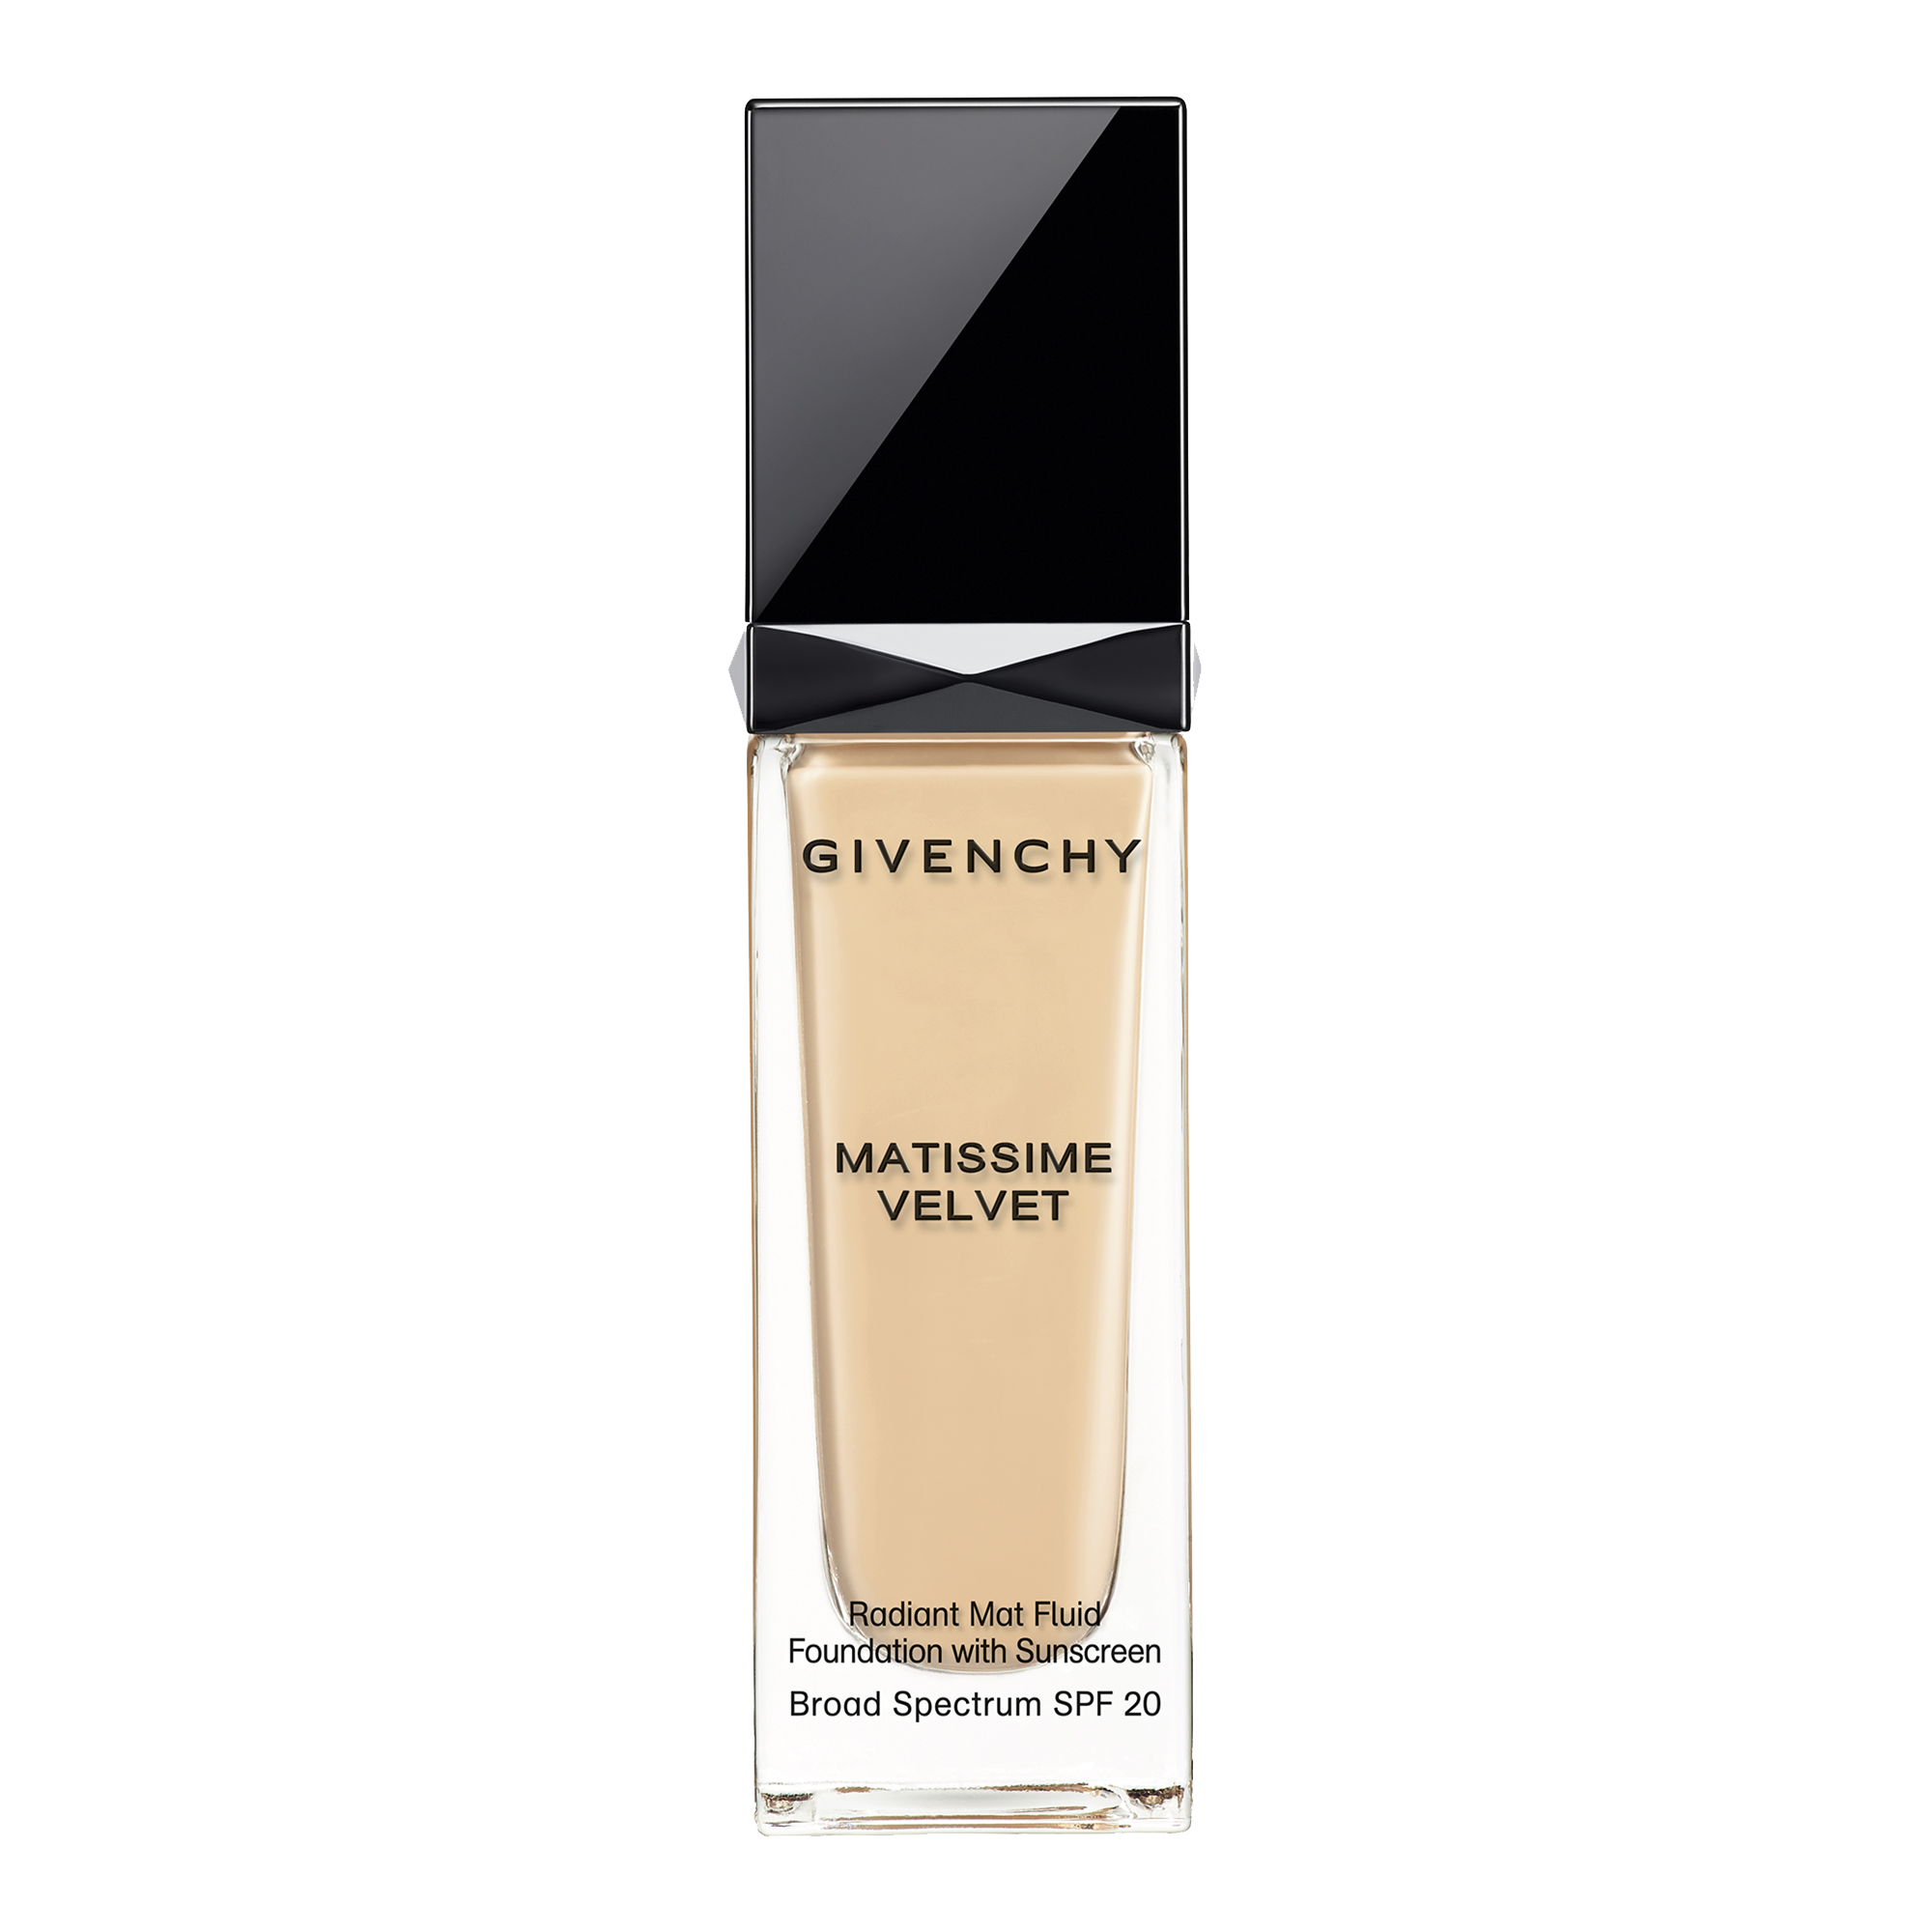 givenchy matissime velvet foundation swatches